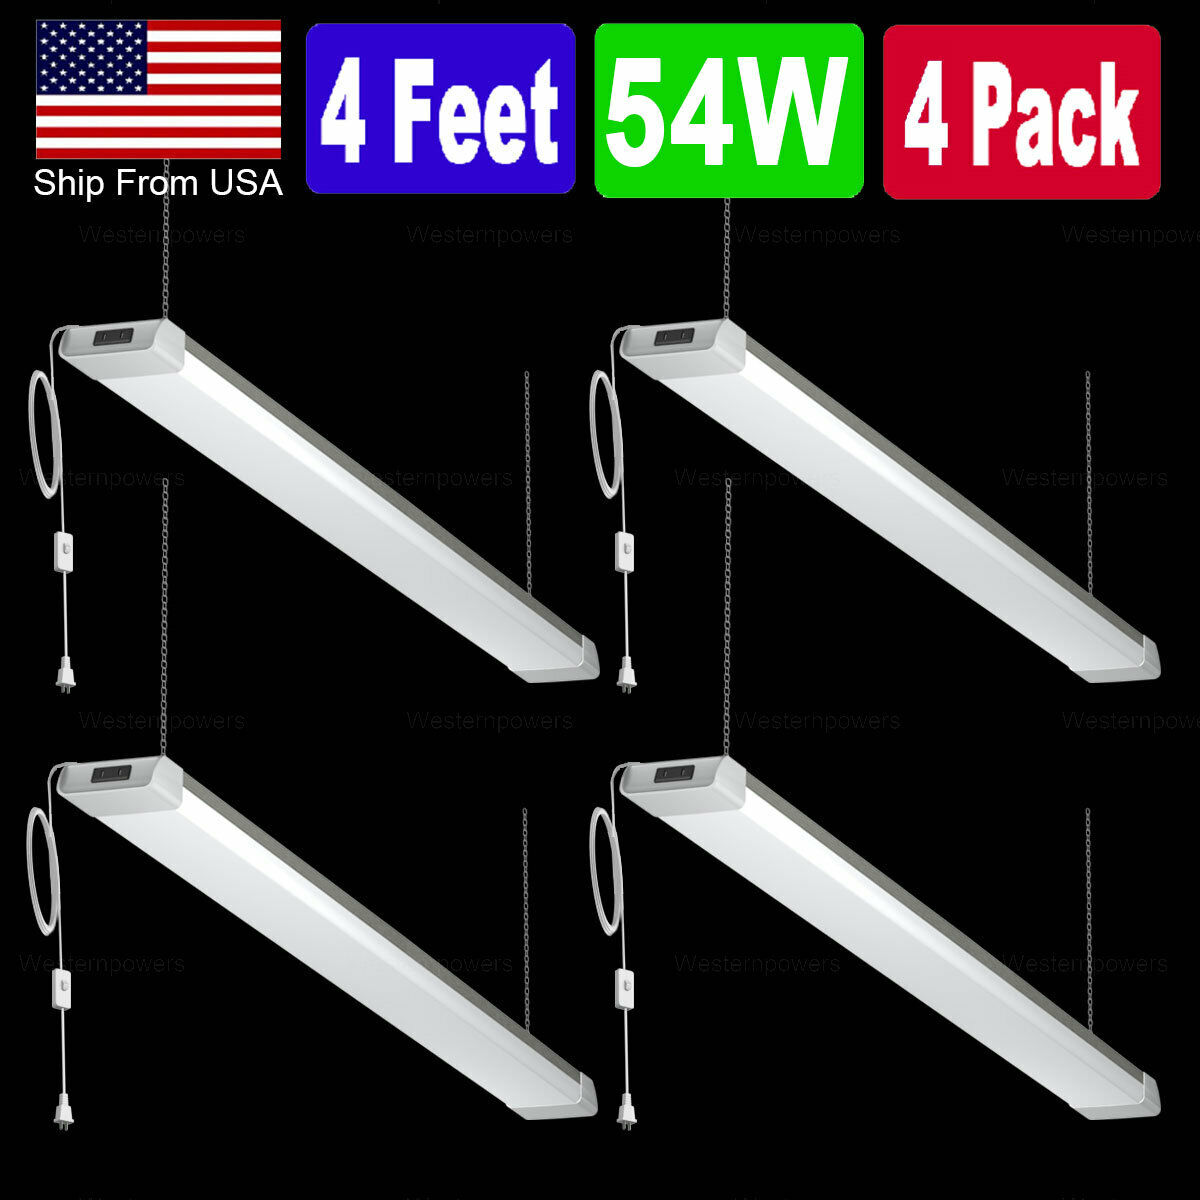 Westernpowers 4 Pack 54W LED Shop Light Garage Workbench Ceiling Lamp Linkable